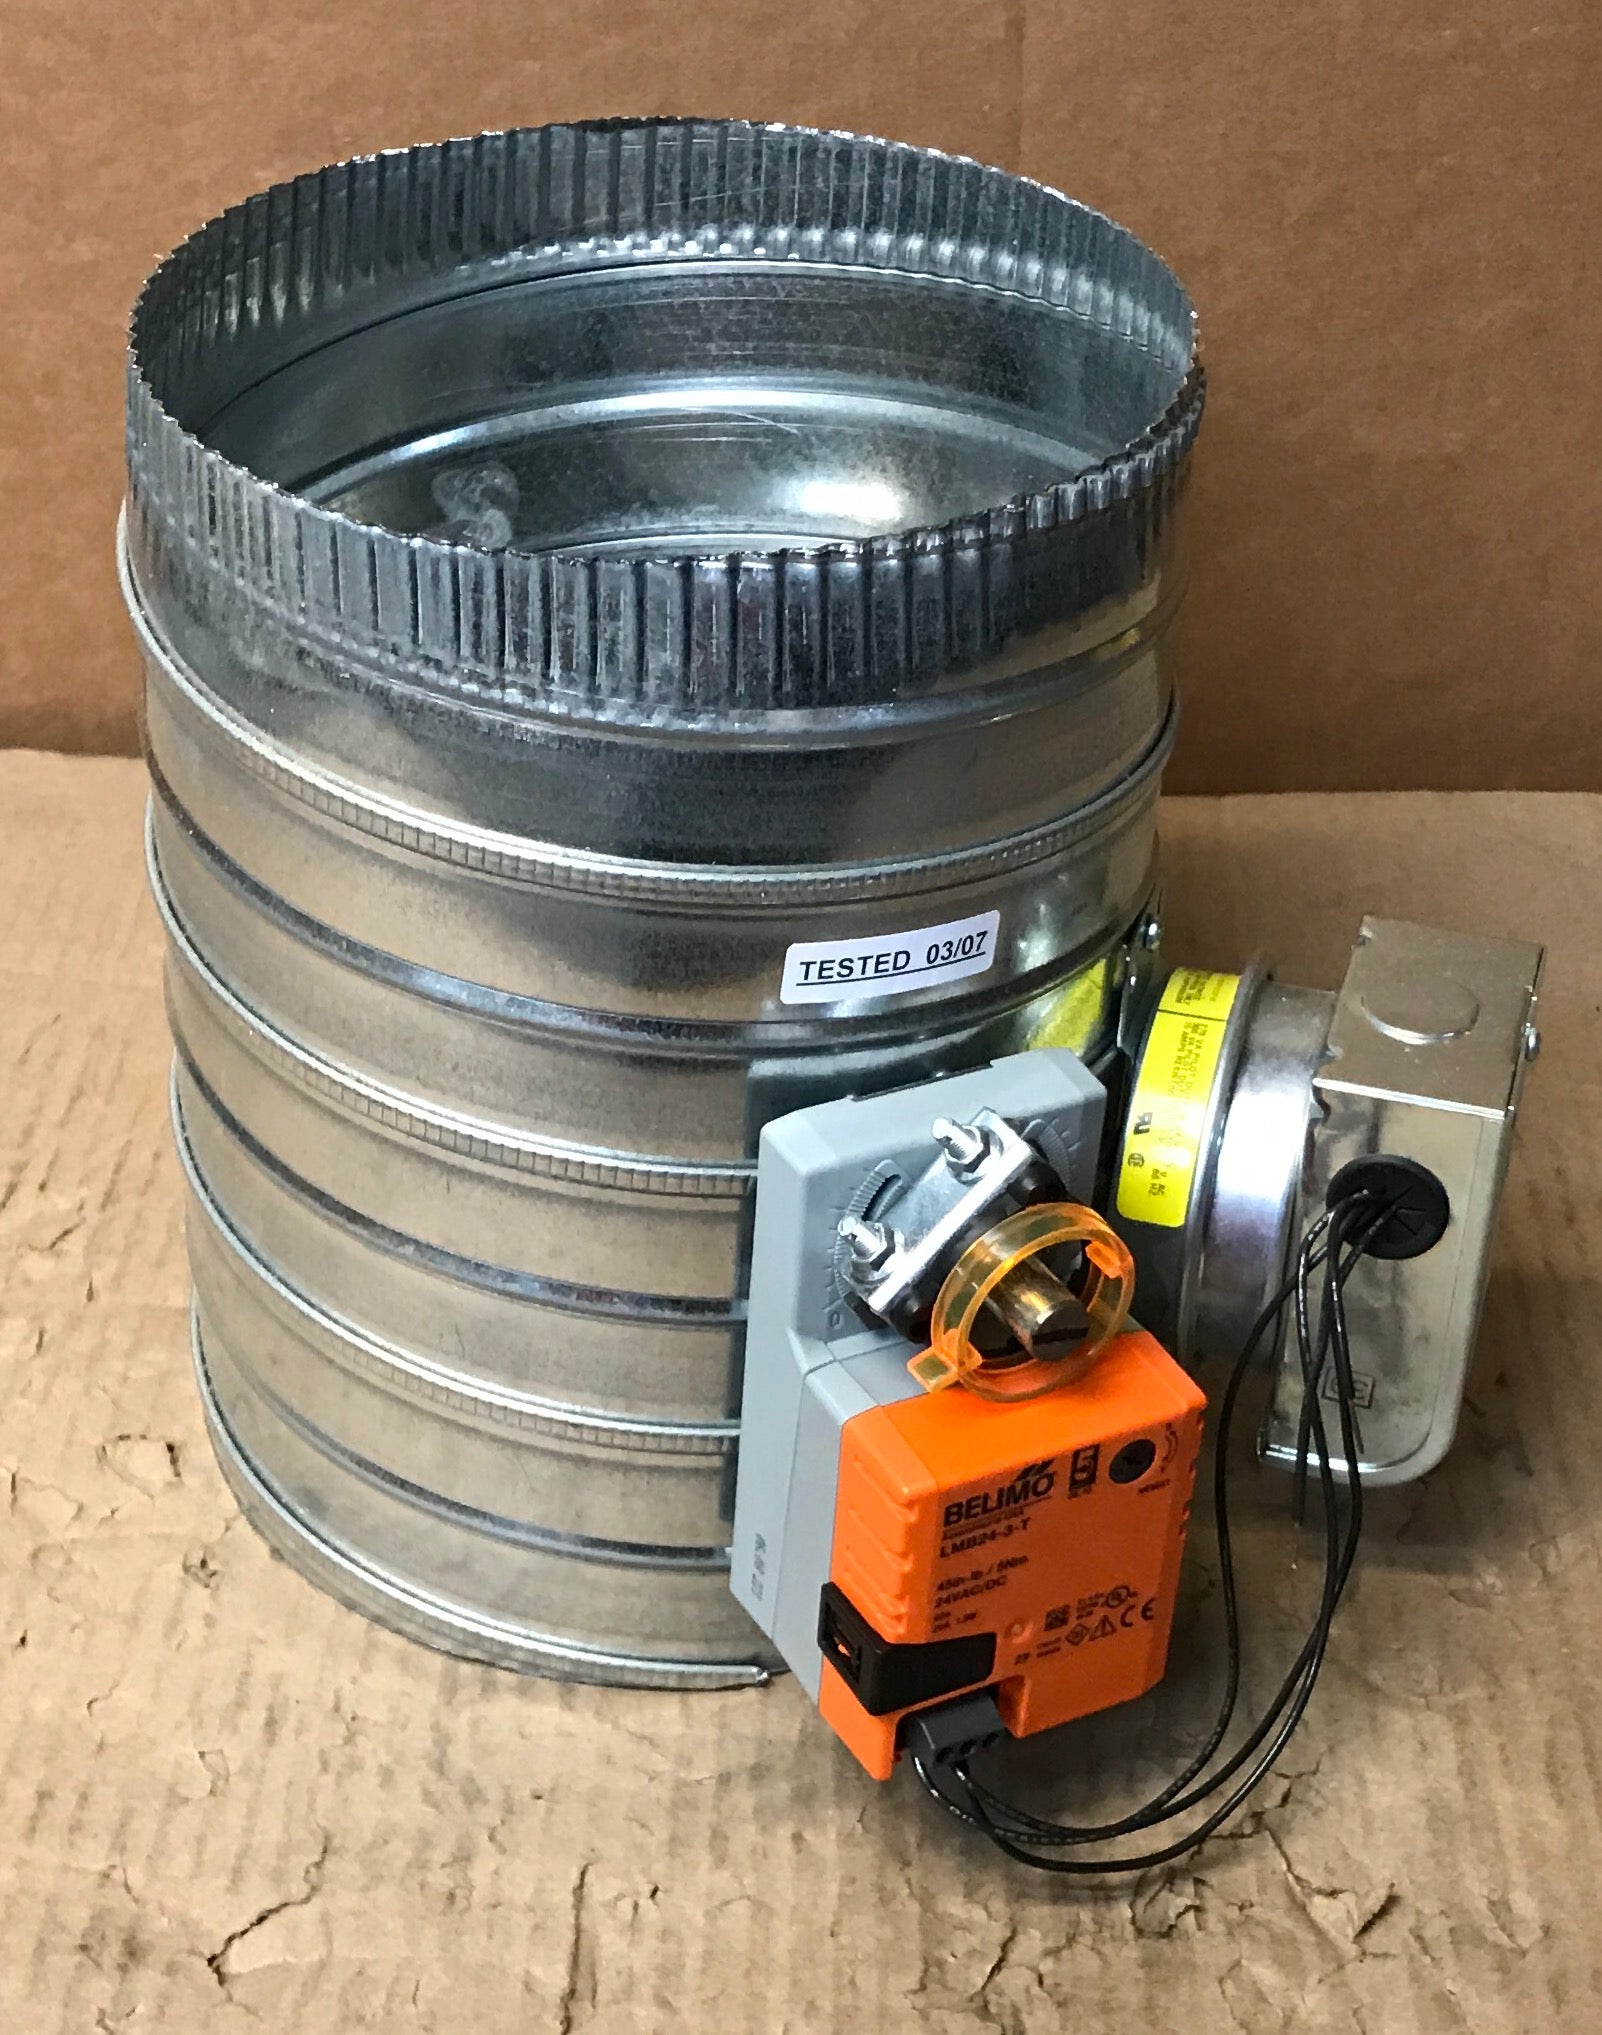 8" STATIC PRESSURE CONTROLLED MOTORIZED BYPASS DAMPER/W 24 VOLT MODULATING ACTUATOR 